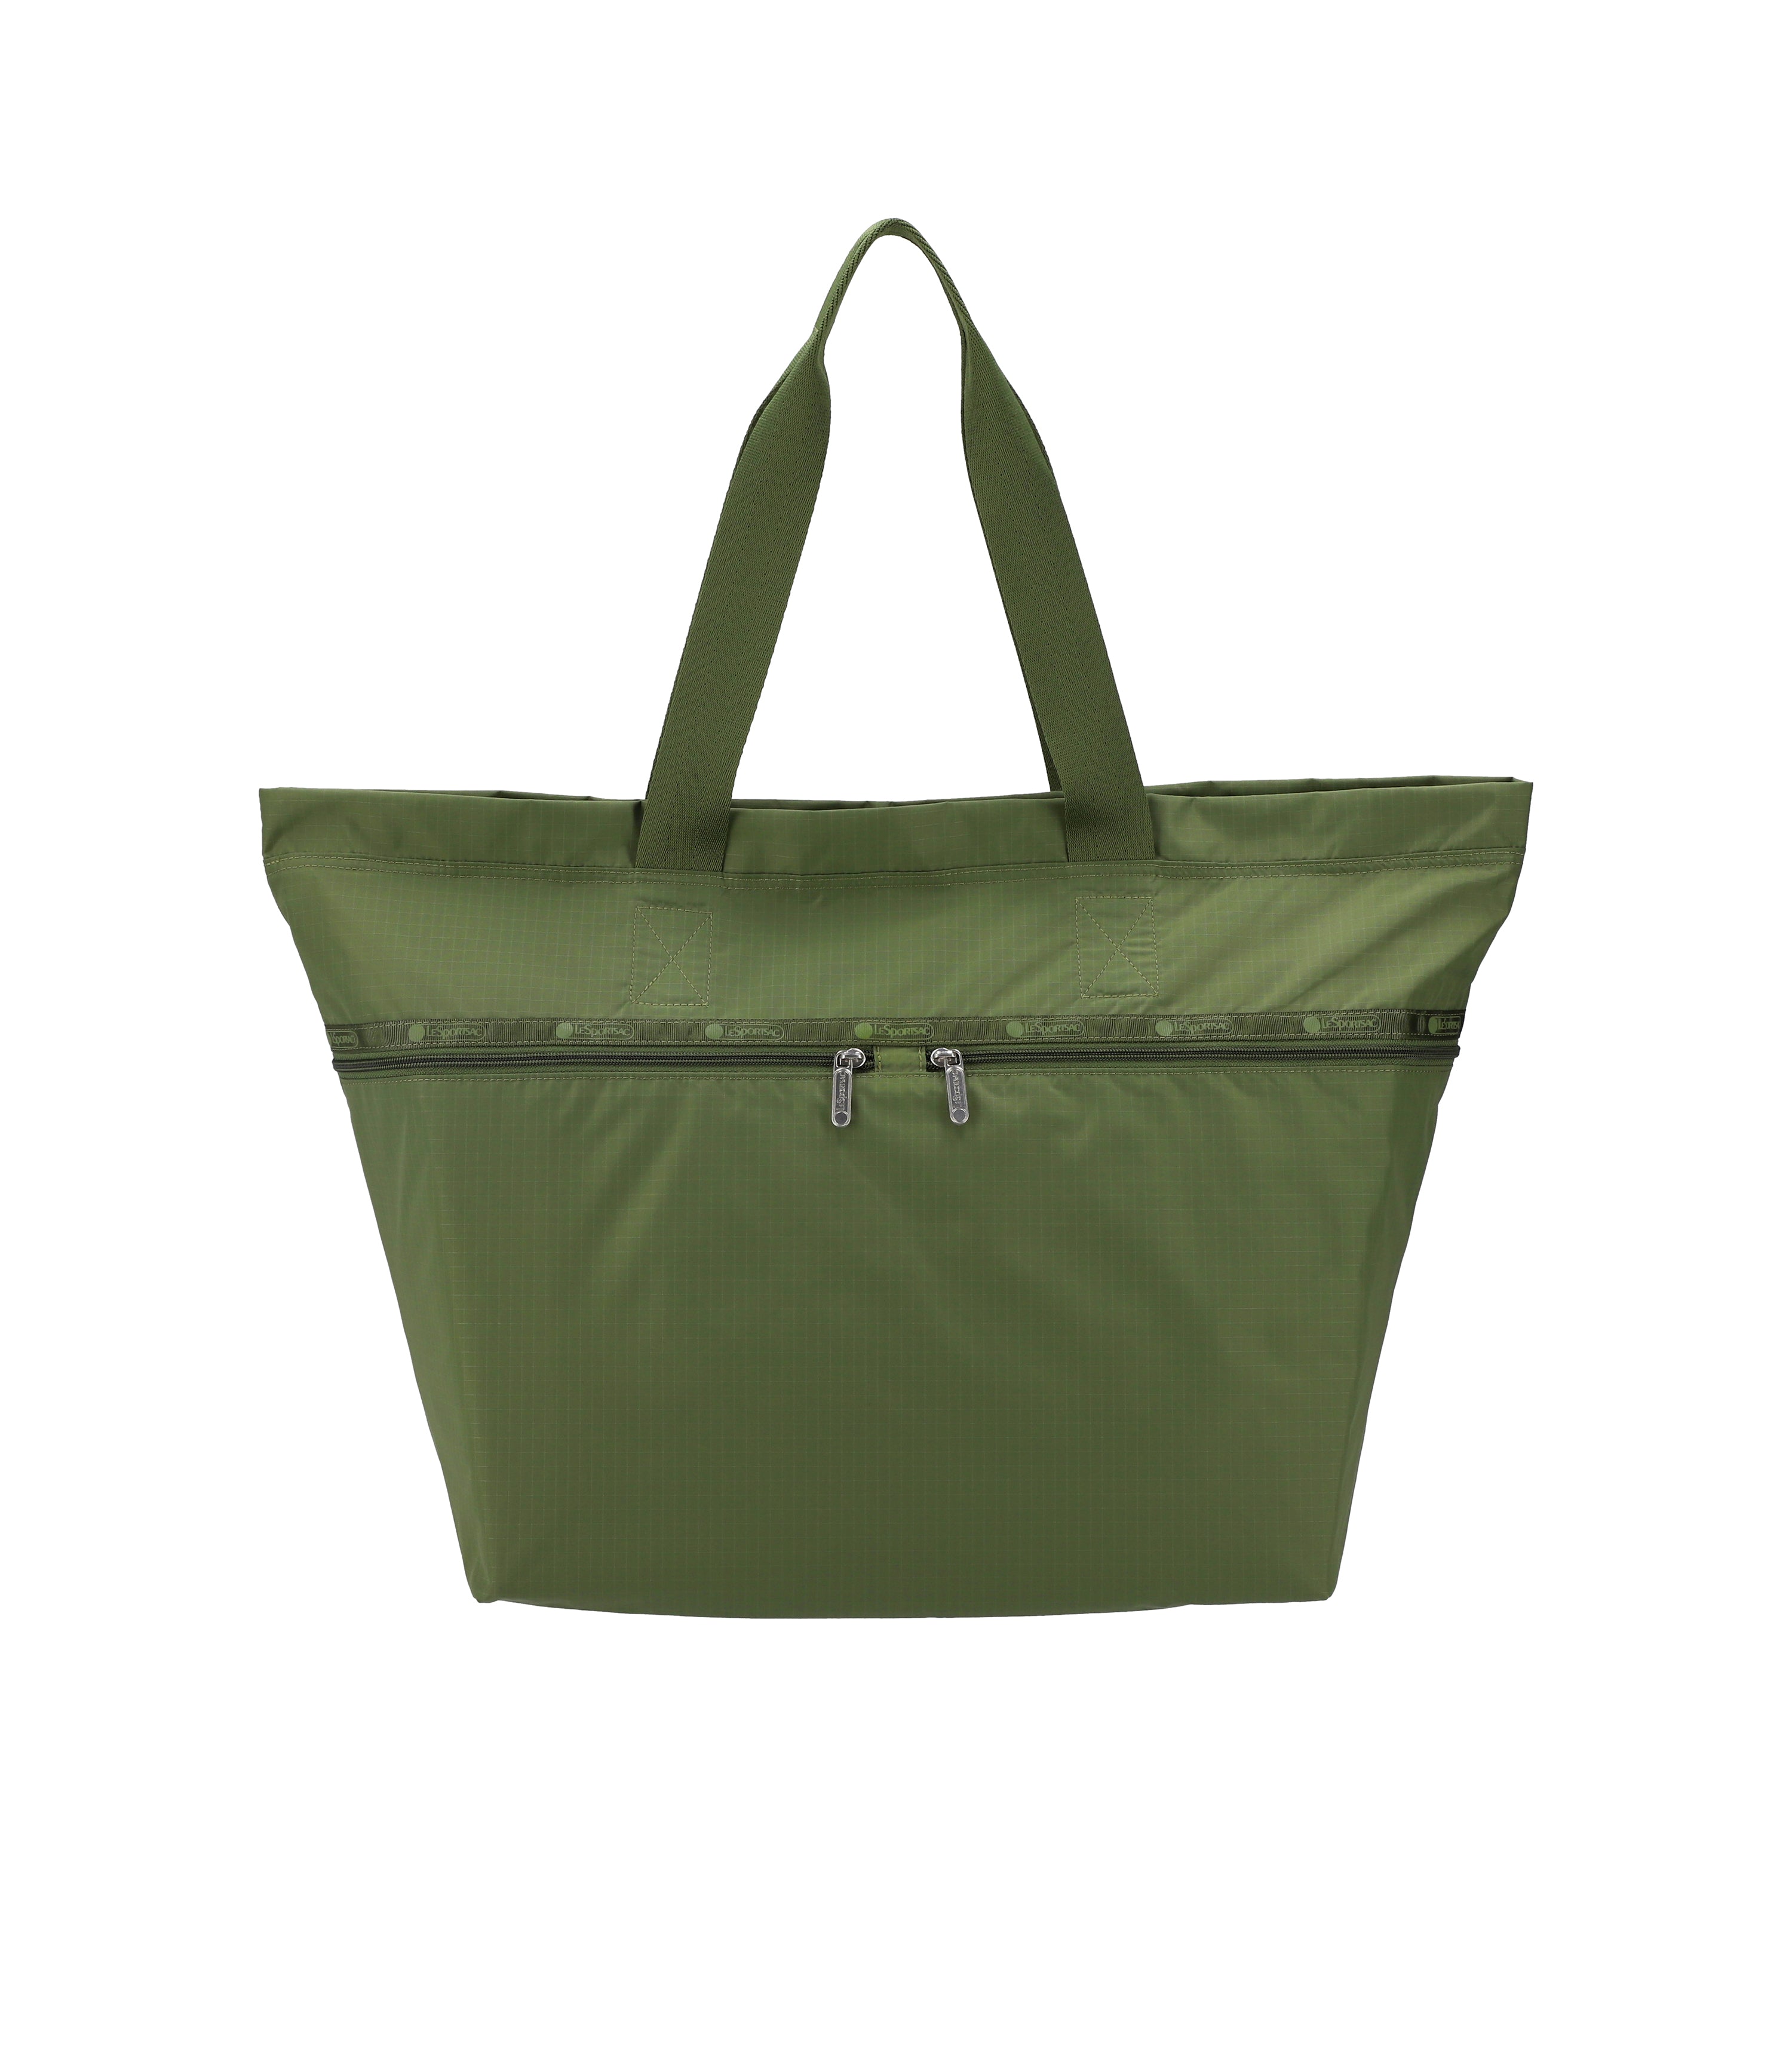 Dark Green Linen Tote Bag. Solid Green Canvas Tote Bag for 